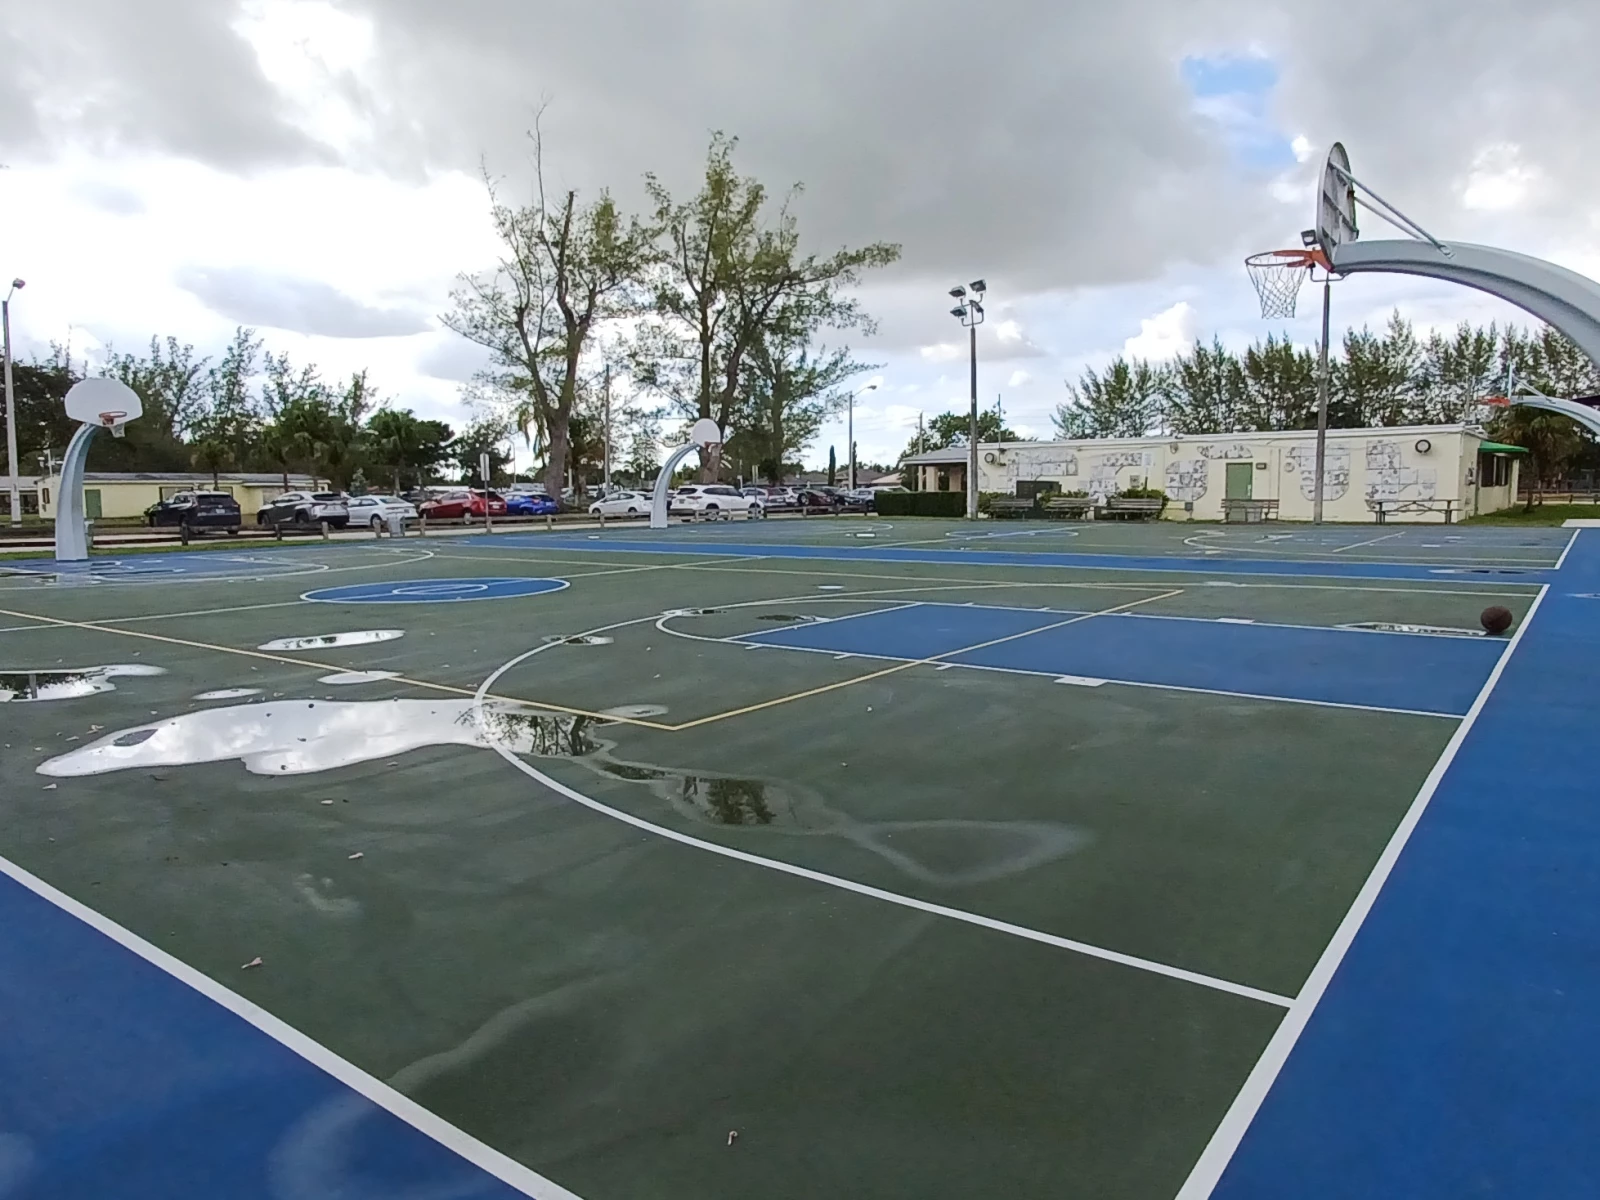 Miami FL Basketball Court: Tropical Park Courts of the World